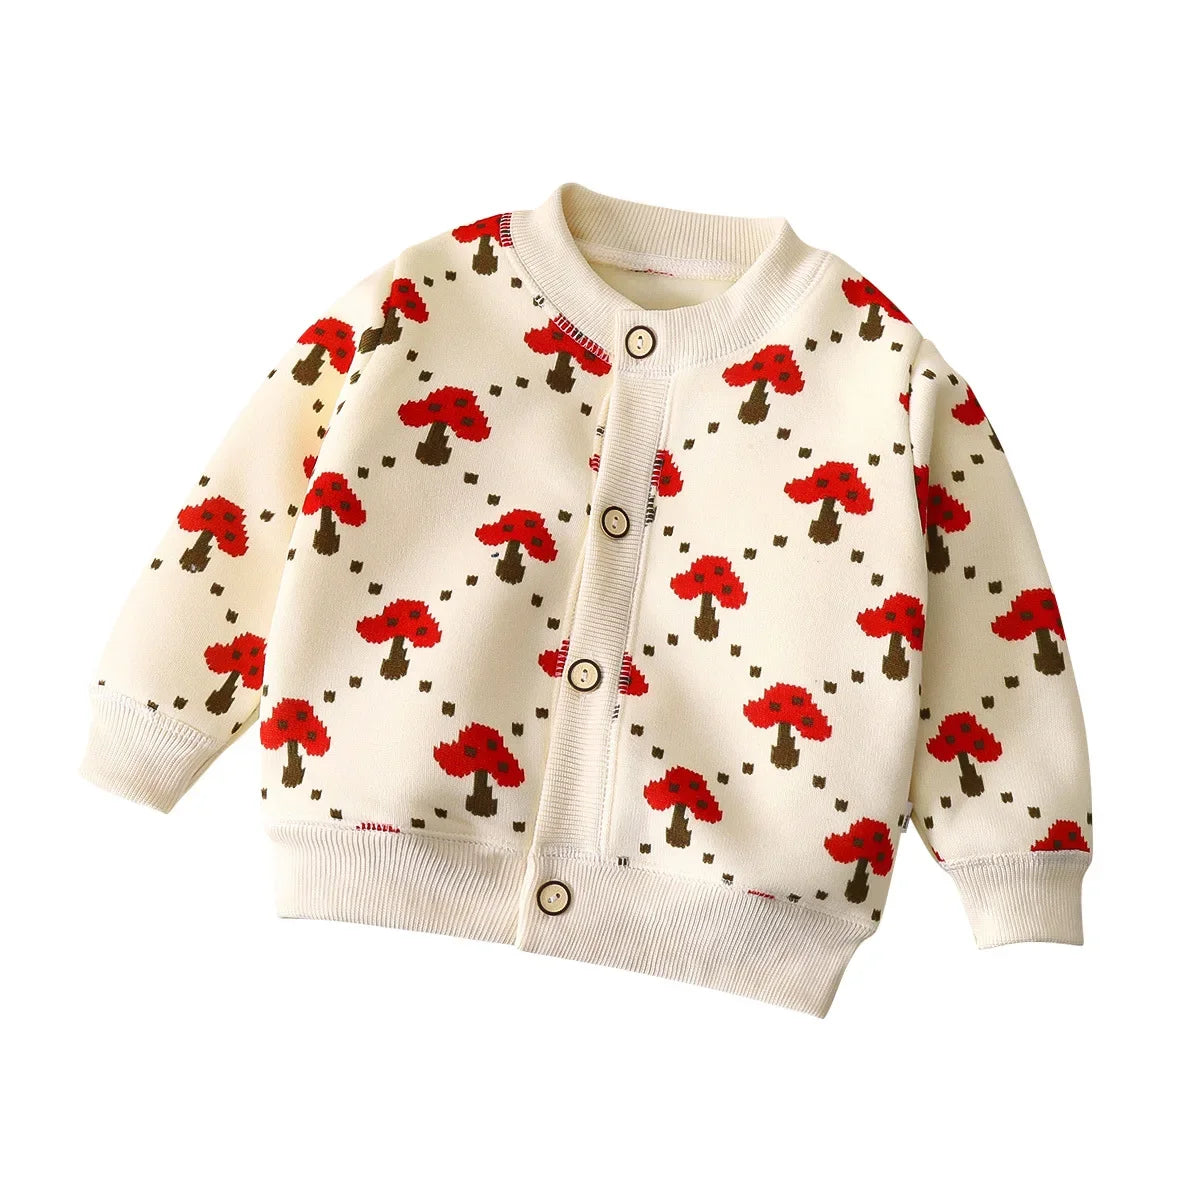 Children Outerwear Autumn Winter Baby Toddler Clothes Girls Sweaters Knitted Sweater Cardigan Long Sleeve Girls Coat Kids Jacket